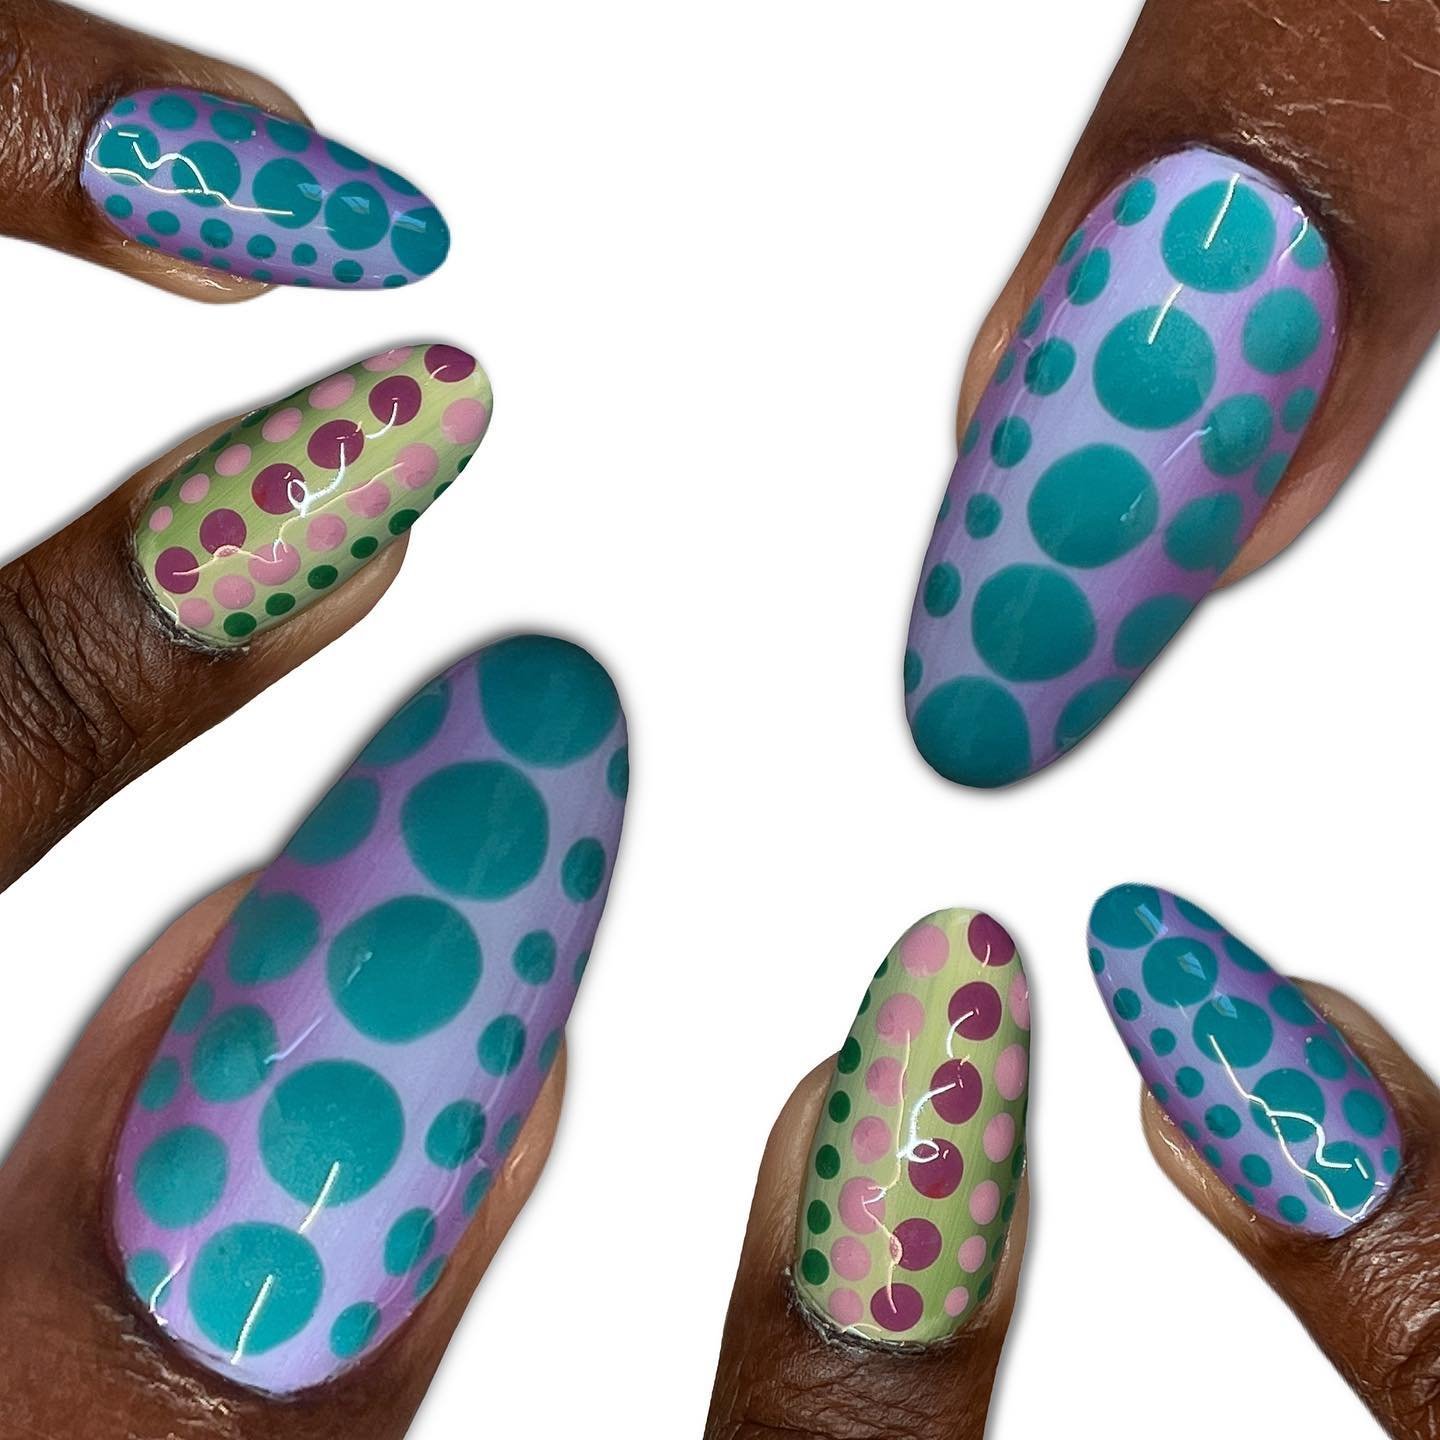 5 - Picture of Cyber Dot Nails